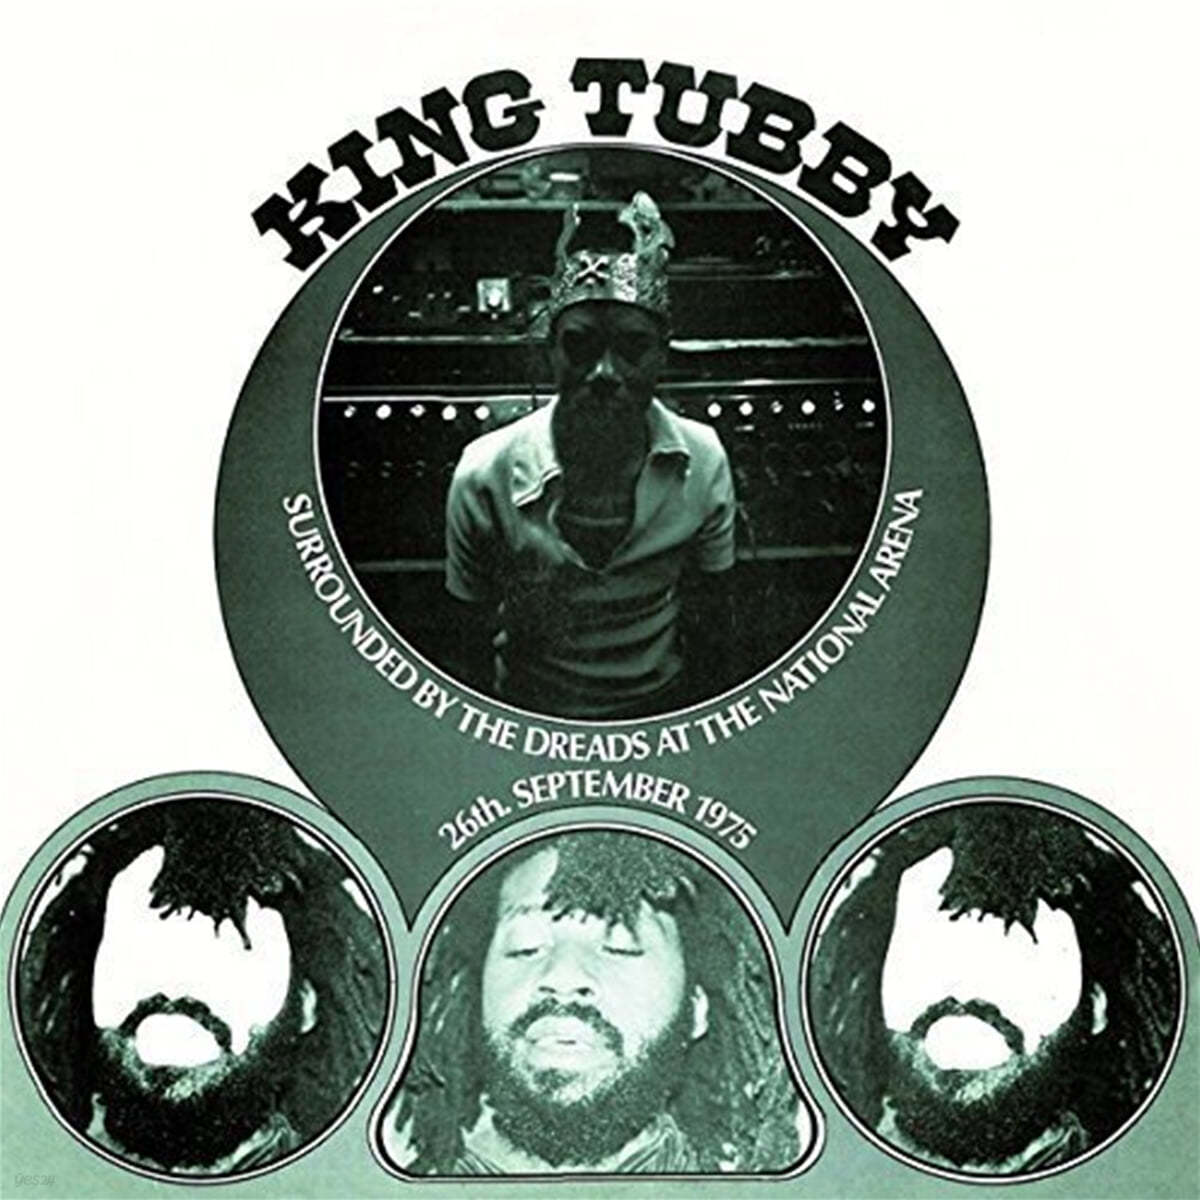 King Tubby (킹 터비) - Surrounded By The Dreads At The National Arena 26th. September 1975 [LP] 